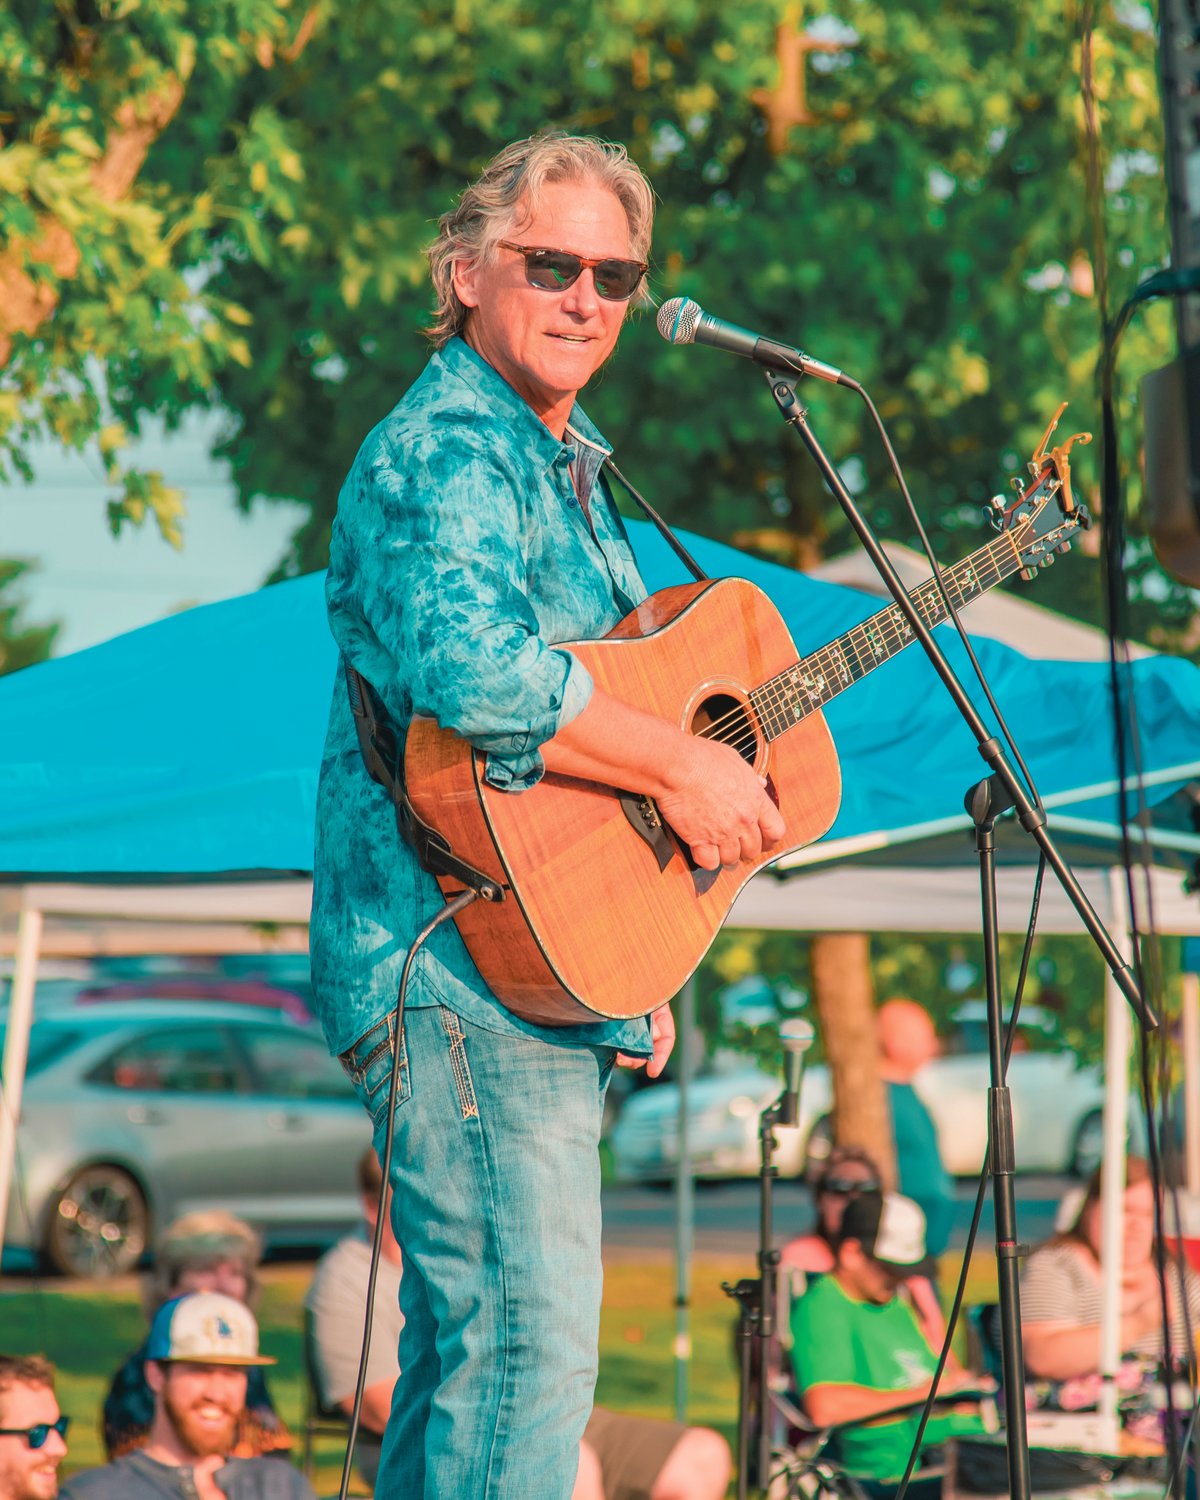 Billy Dean smiles while performing during Music at the Park in Chehalis on Friday at Recreation Park.